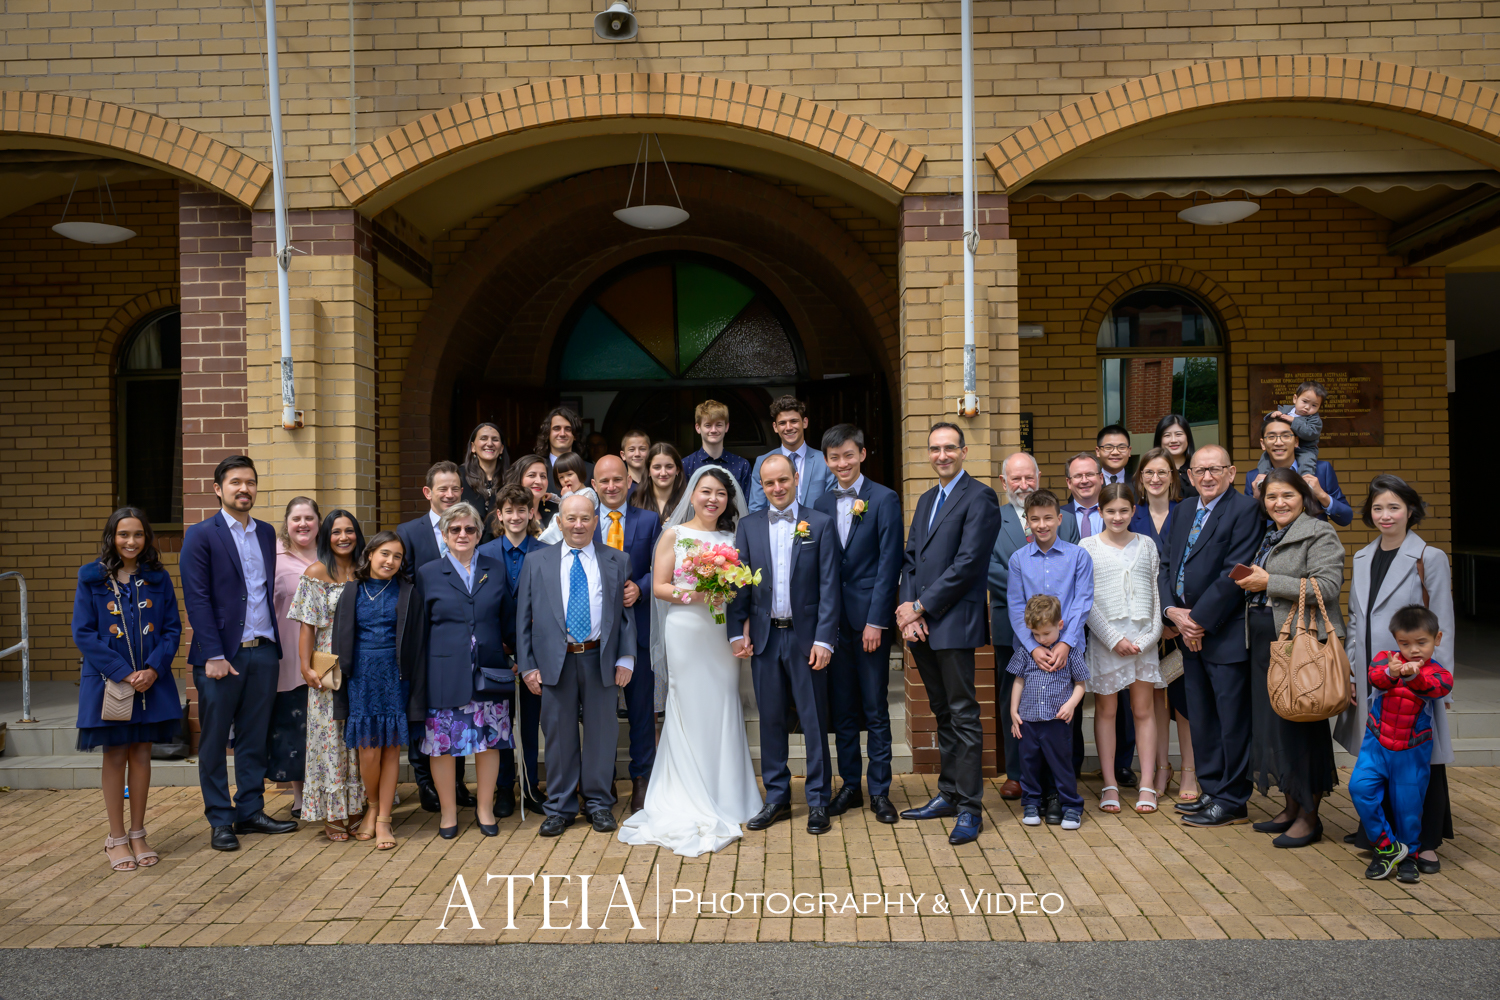 , Many and George&#8217;s wedding photography at Garden House Royal Botanical Gardens captured by ATEIA Photography &#038; Video